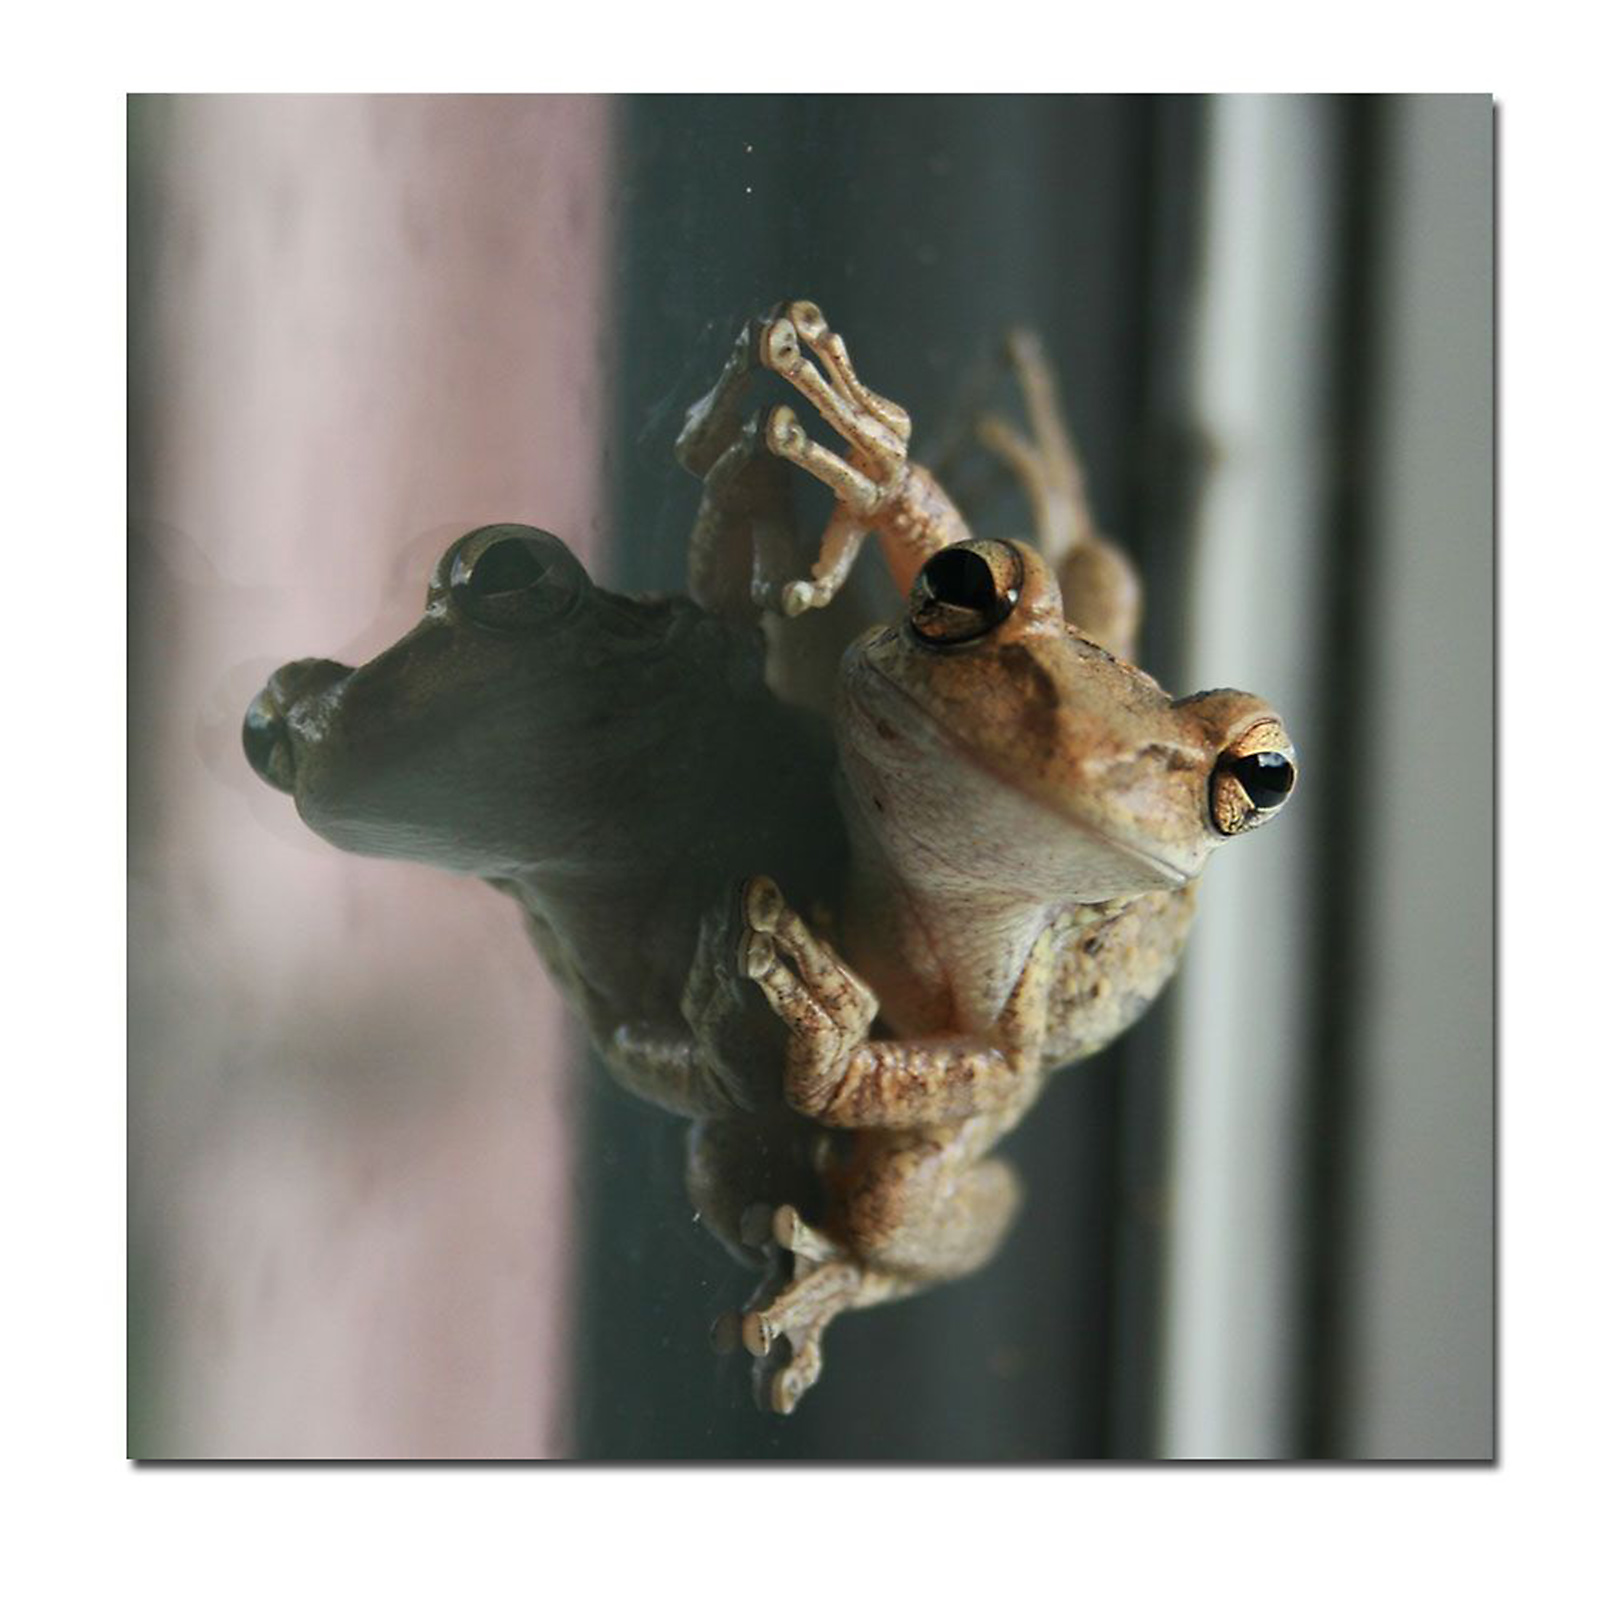 Trademark Global 24x24 inches "Cute Frog" by Patty Tuggle